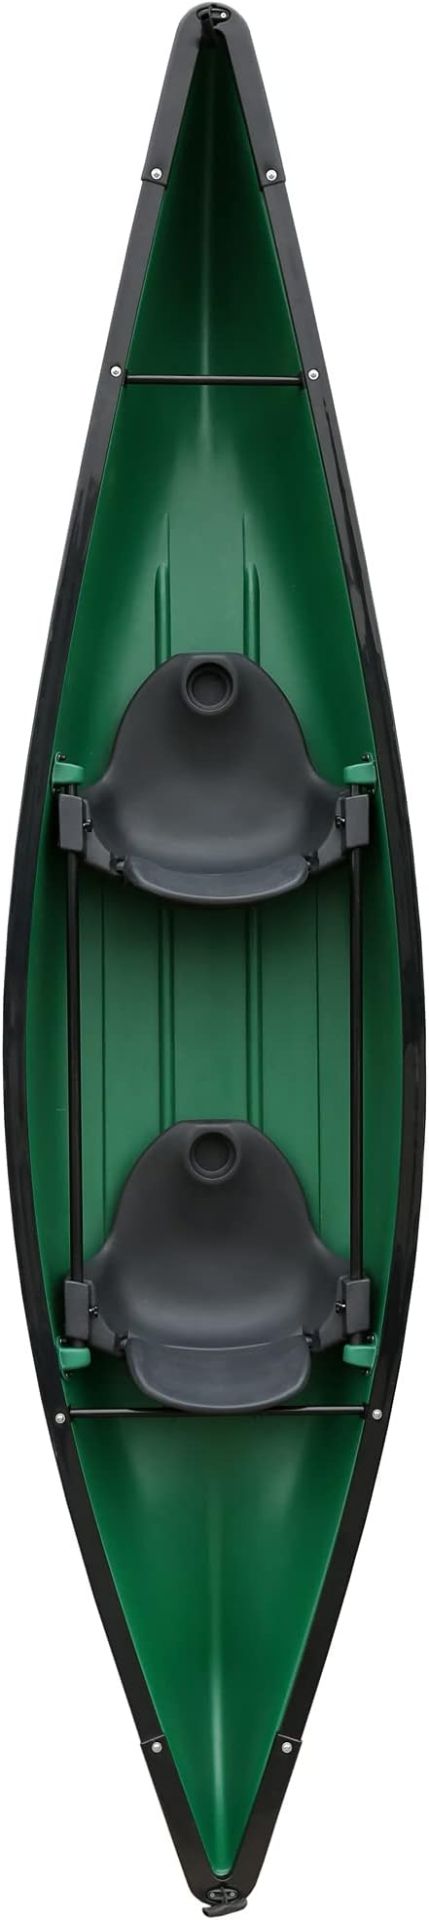 RBSM SPORTS 2-PERSON ZEN CANOE W/ (2) ADJUSTABLE ROTOMOLD SEATS (USED) (MSRP $2,500) - Image 2 of 4